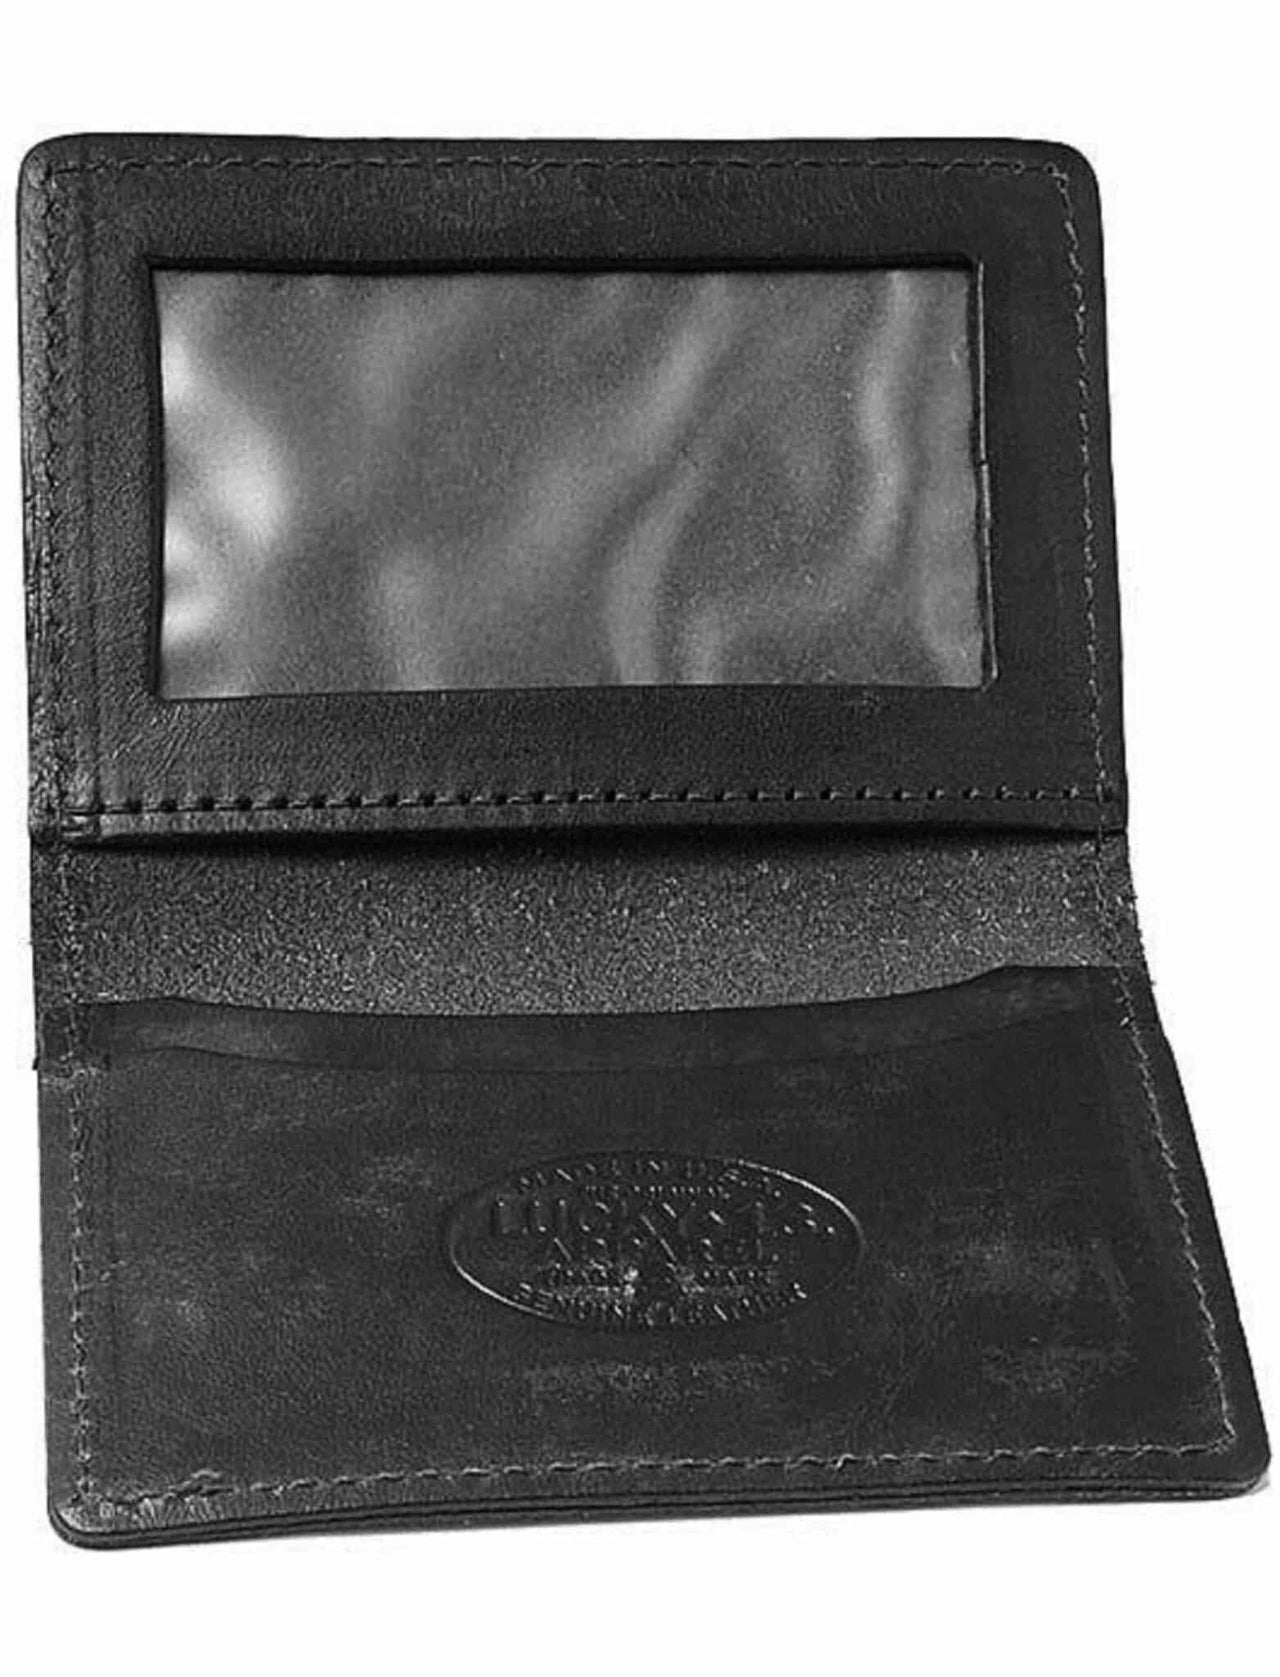 Lucky 13 Wallet Death or Glory Card Holder Black